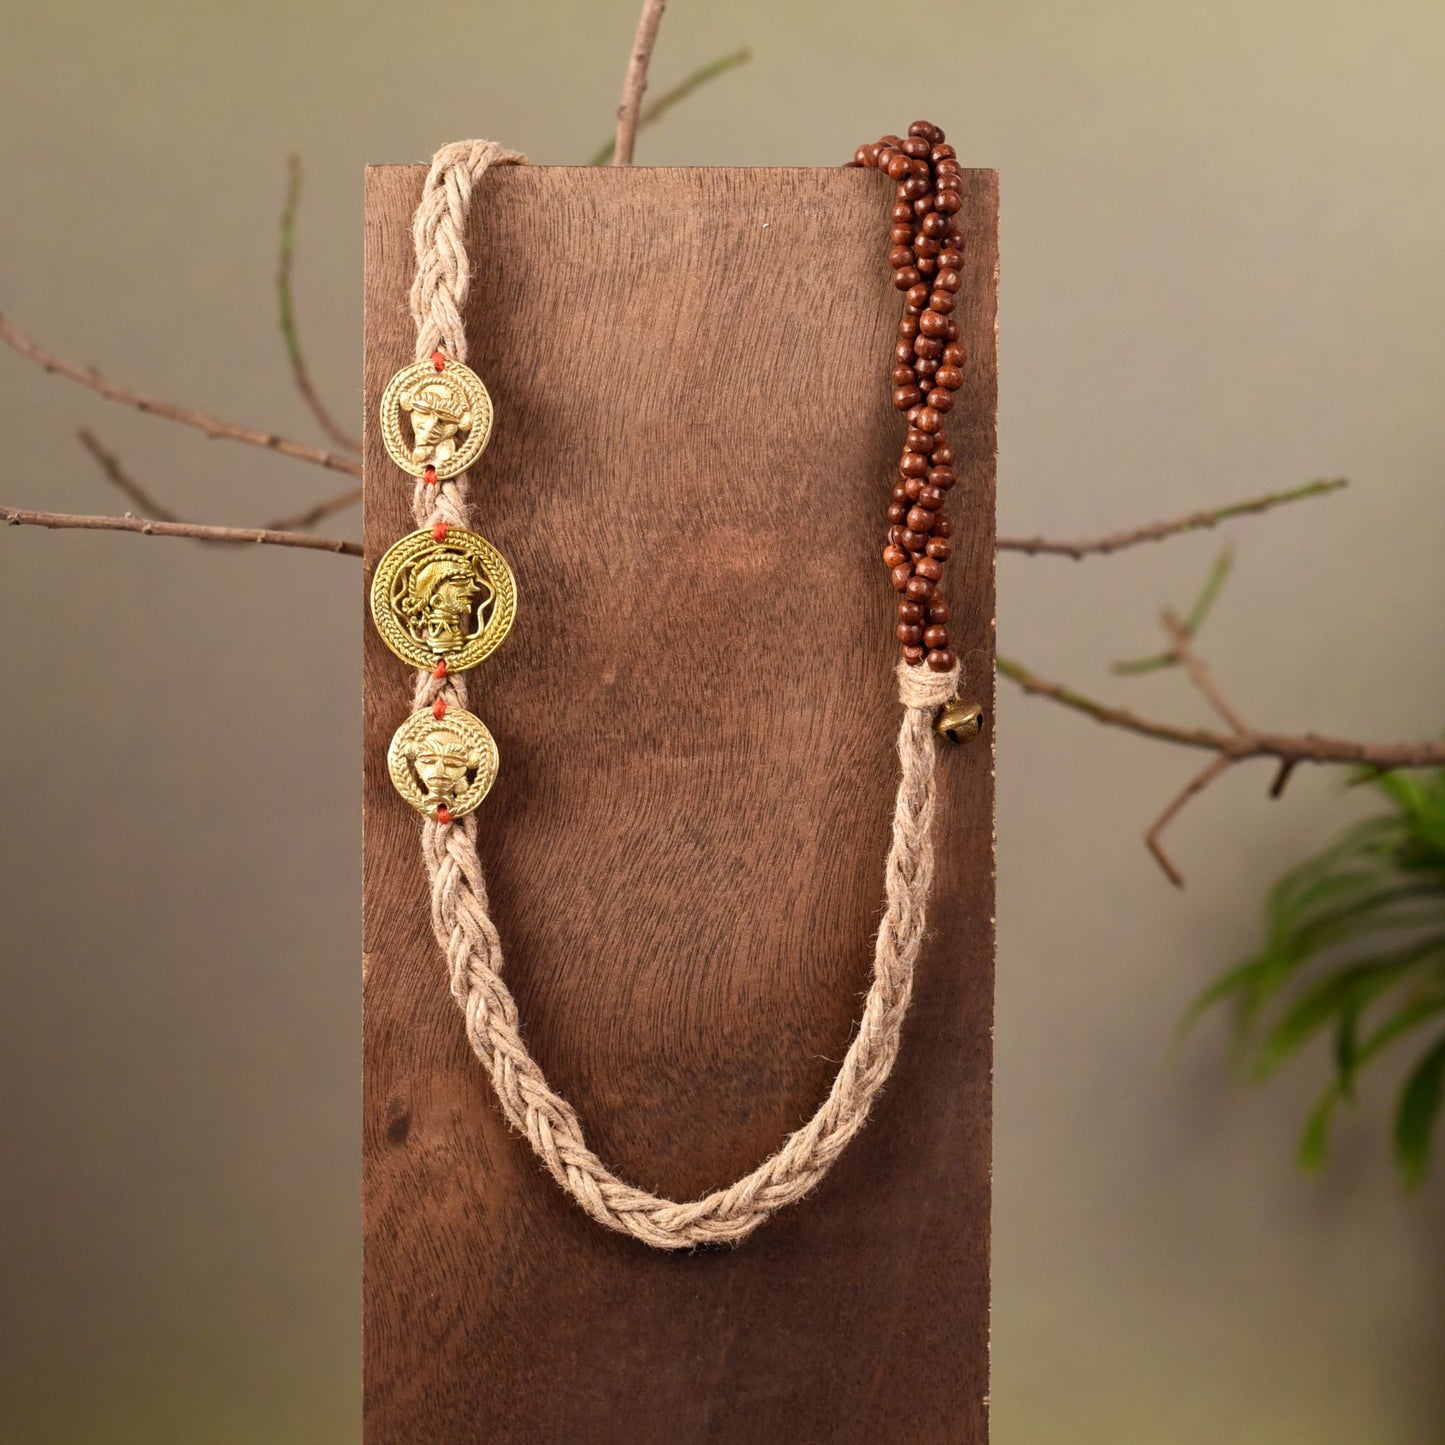 Boho Chic: Handcrafted Jute Necklace with Brass Figures